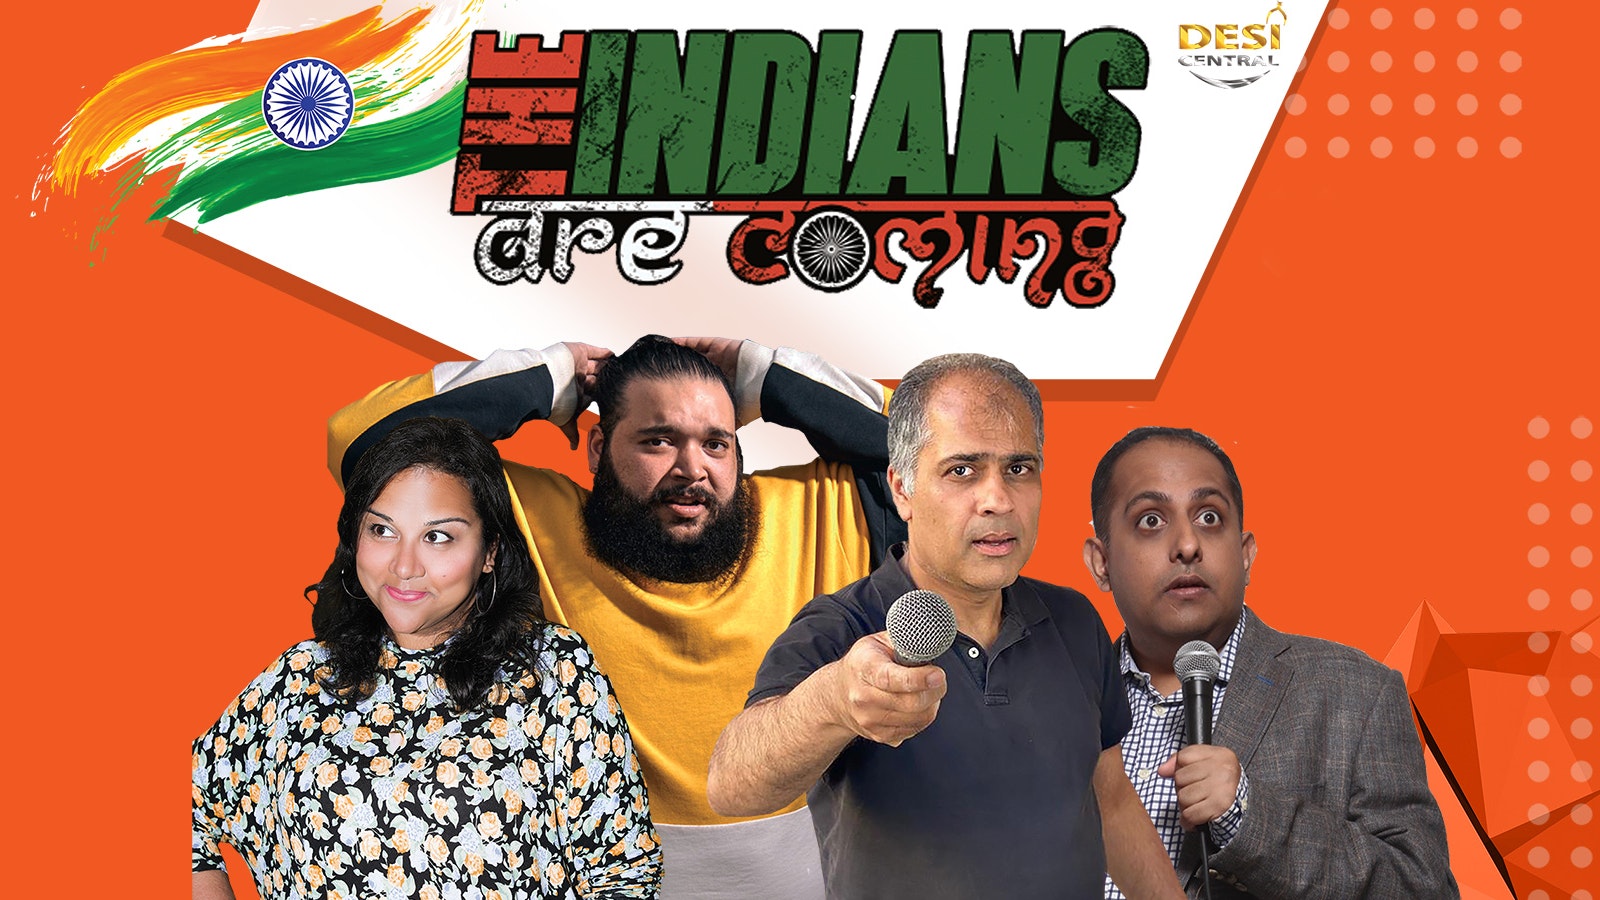 The Indians Are Coming – Birmingham